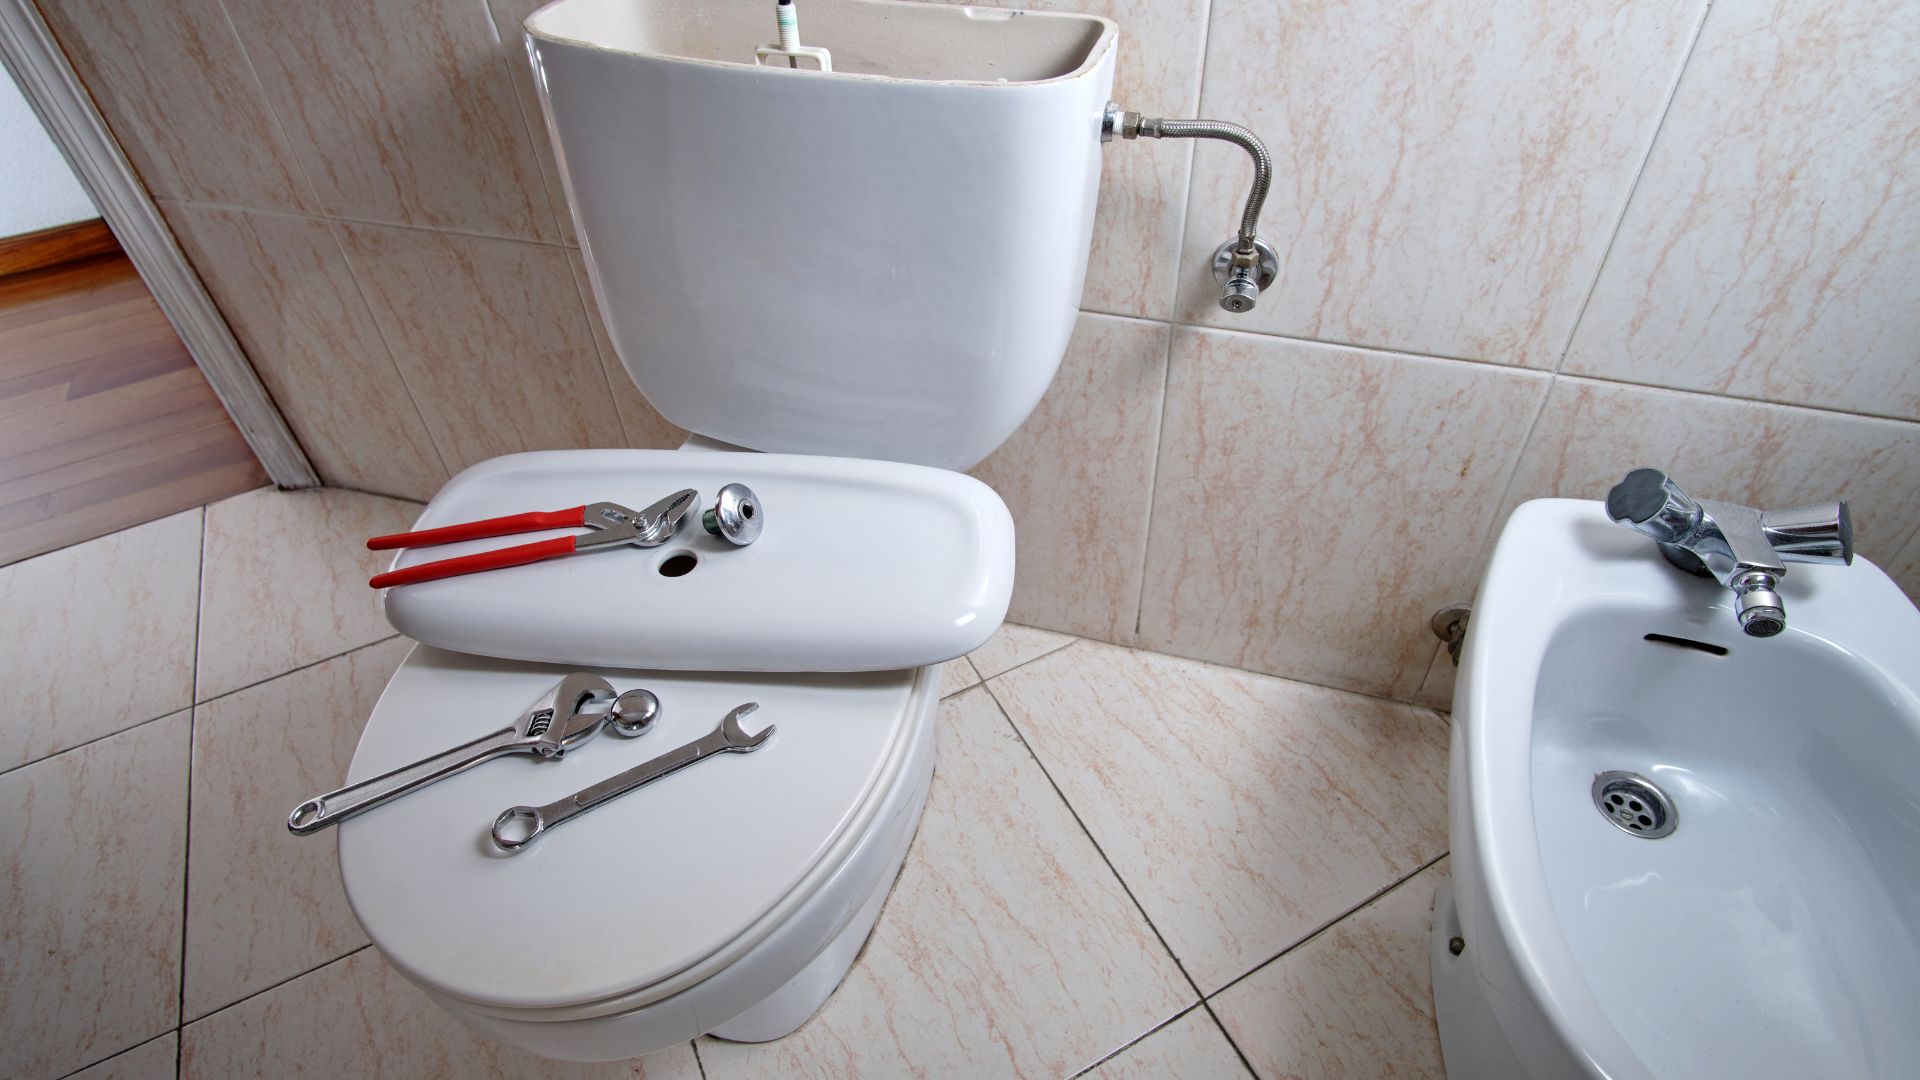 Contact CAN Plumbing and Drainage for all your toilet requirements, expertly handled by our plumbers.